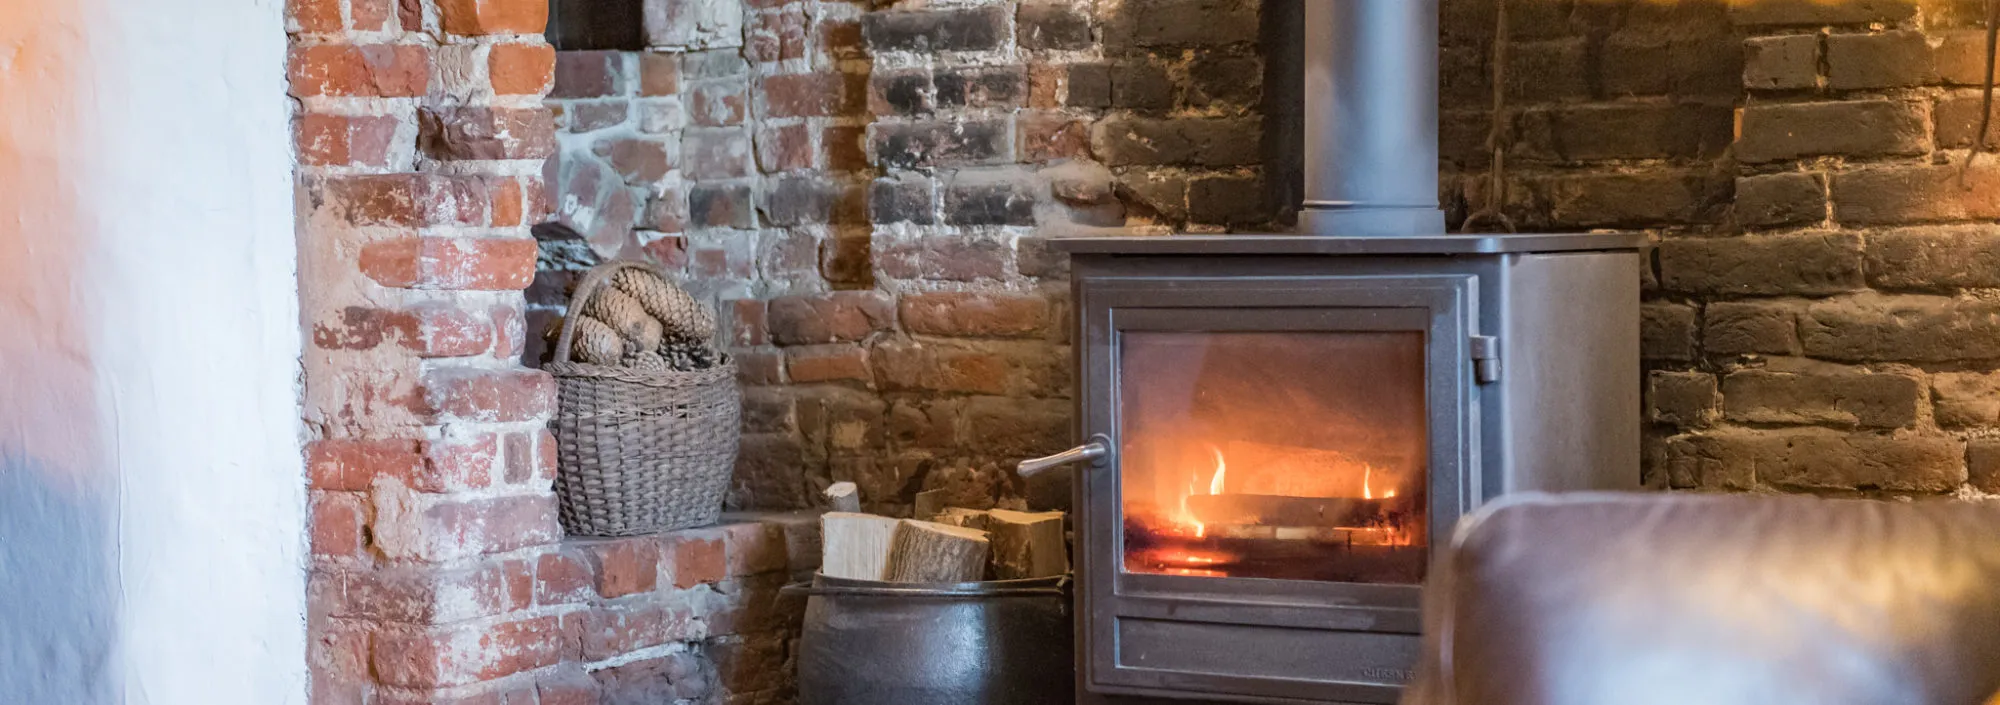 Kent holiday cottages with an open fire